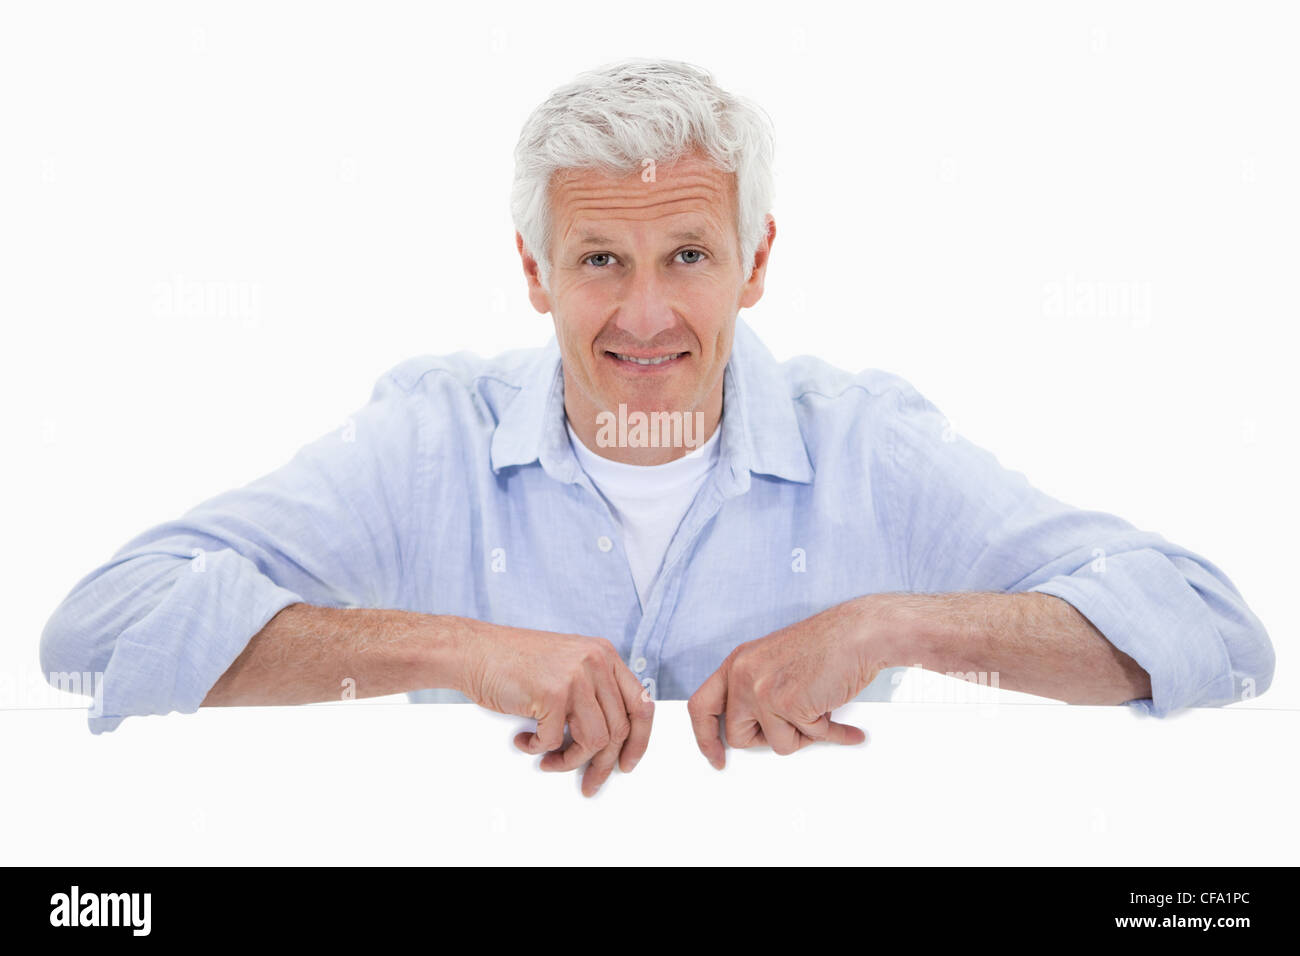 Portrait of a smiling mature man standing behind blank panel Stock Photo